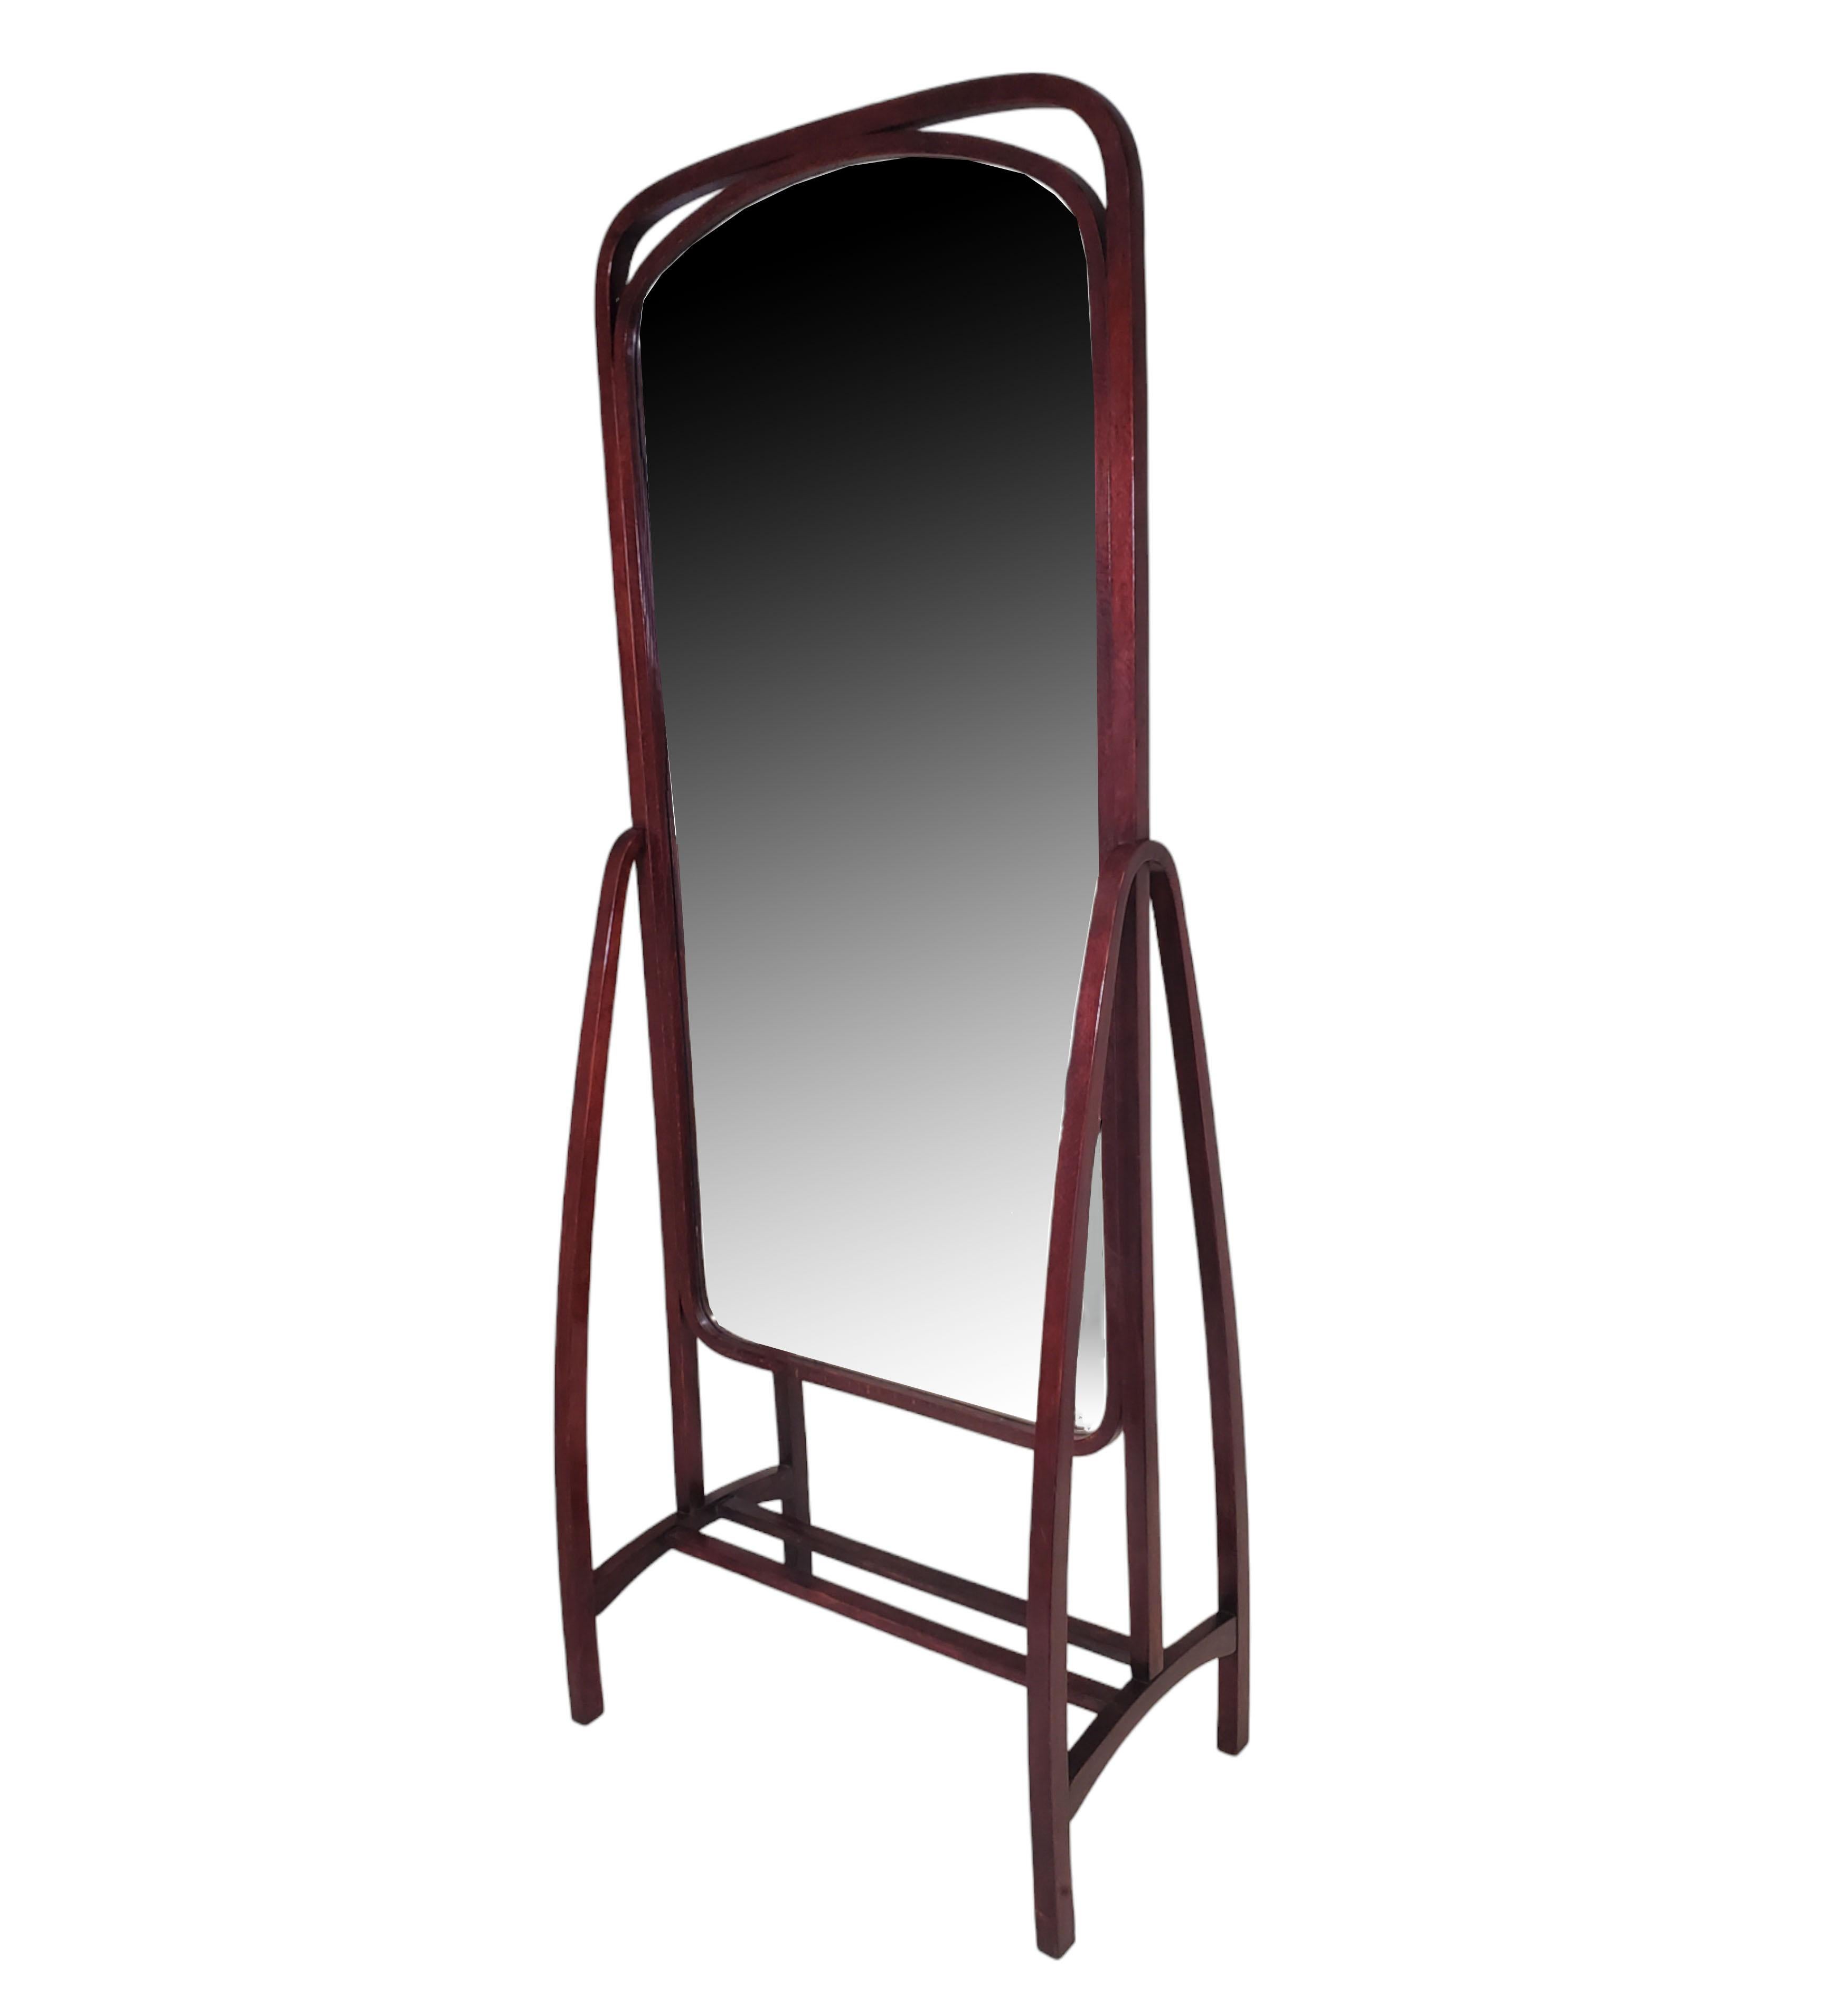 
Austrian, Wien full length dressing mirror in stained and polished beechwood with double curved bentwood surround extending the full length of the stand and culminating in a very unusual and elegant leggy base.
This standing mirror circa 1904 has